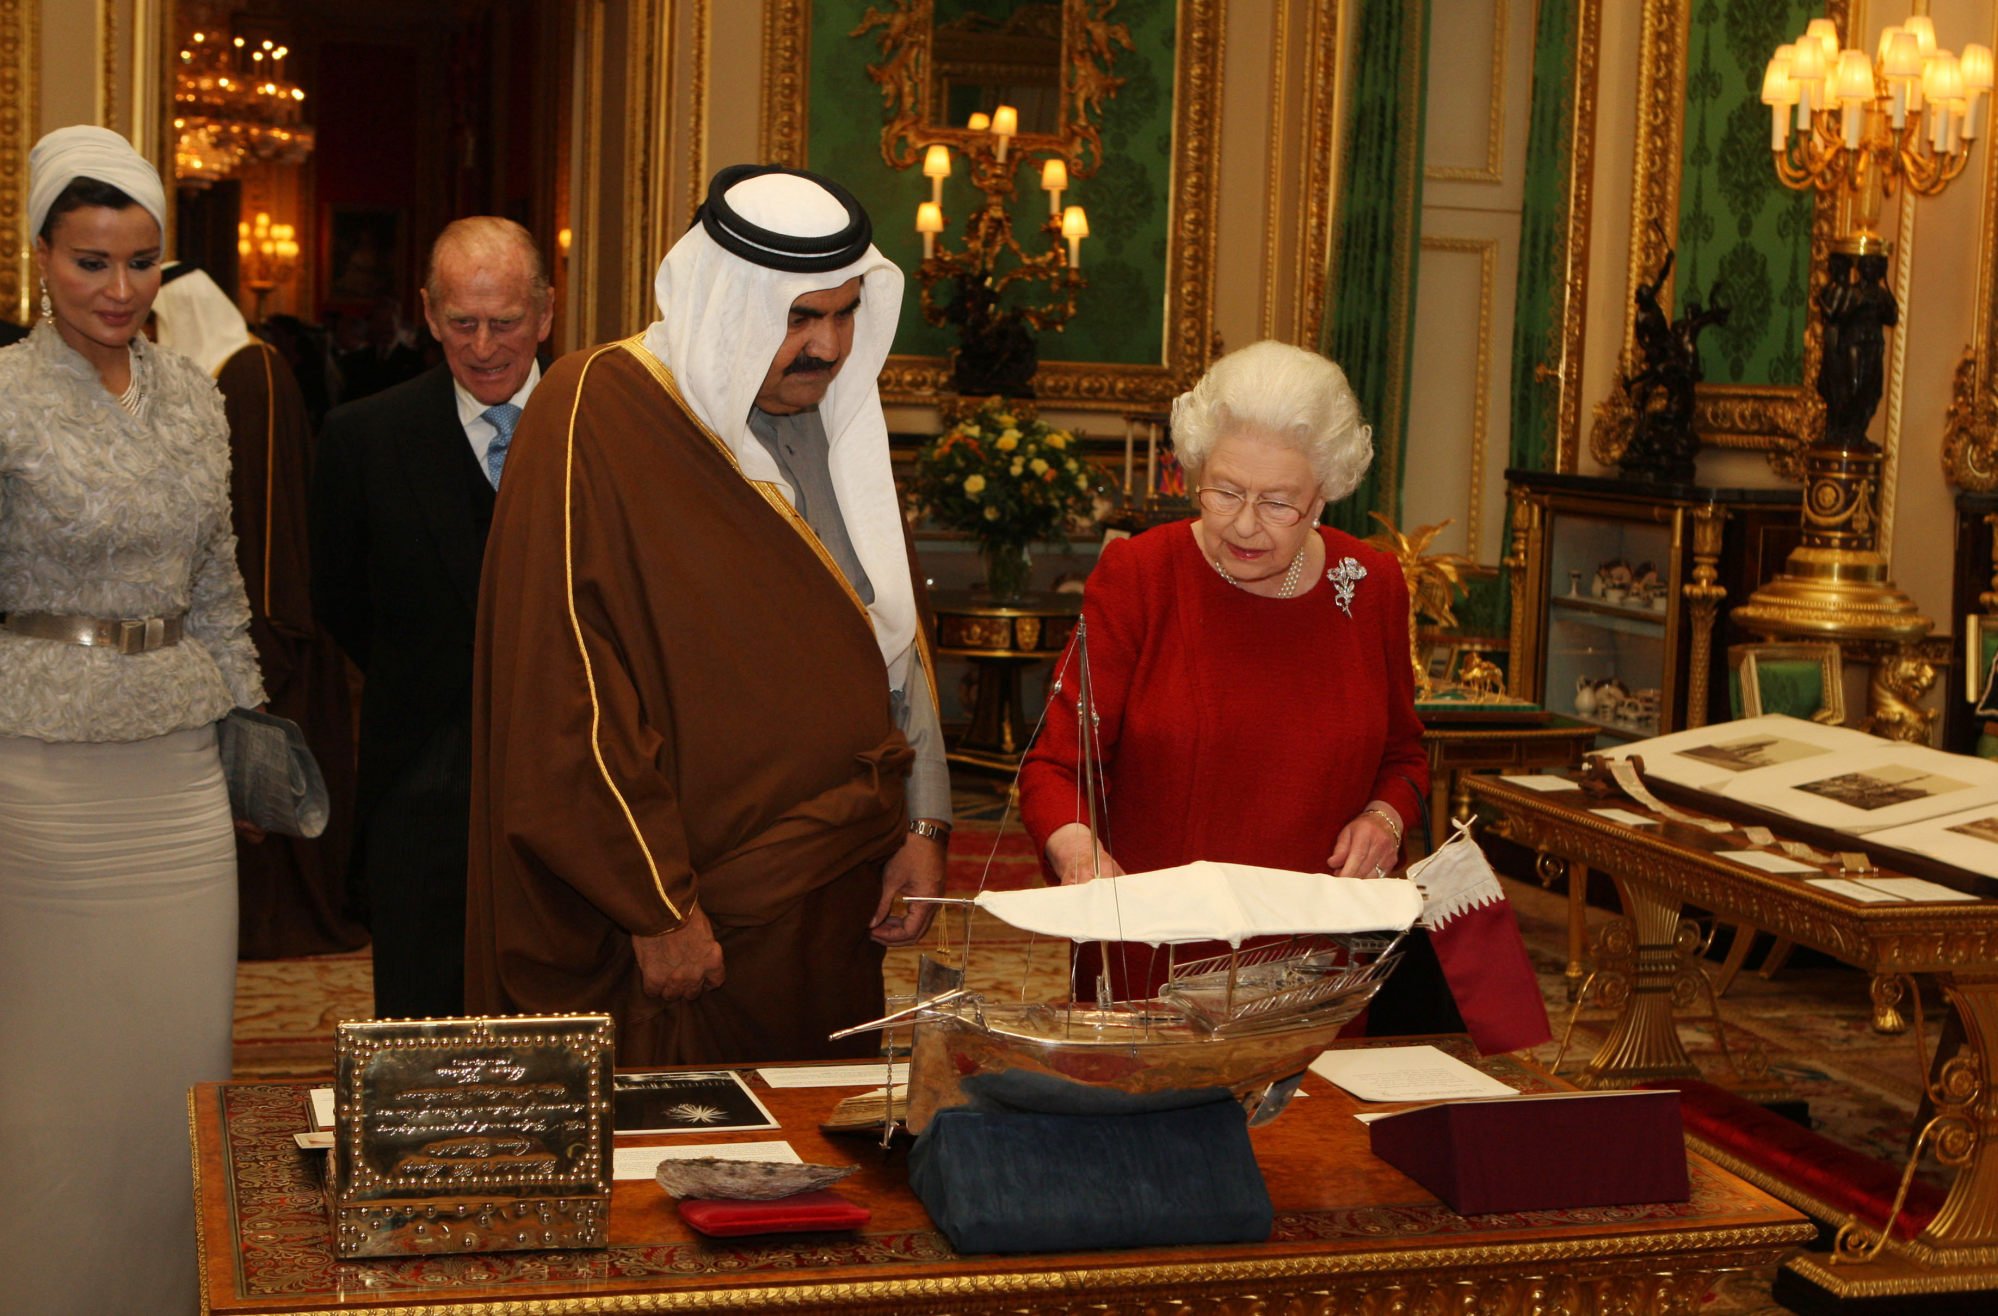 The late Queen Elizabeth shows the former Emir of Qatar, Sheikh Hamad bin Khalifa al-Thani, around exhibits with one of his three wives, Sheikha Mozah bint Nasser Al-Missned, from the Royal Collection at Windsor Castle during his state visit in 2010. Photo: Getty Images